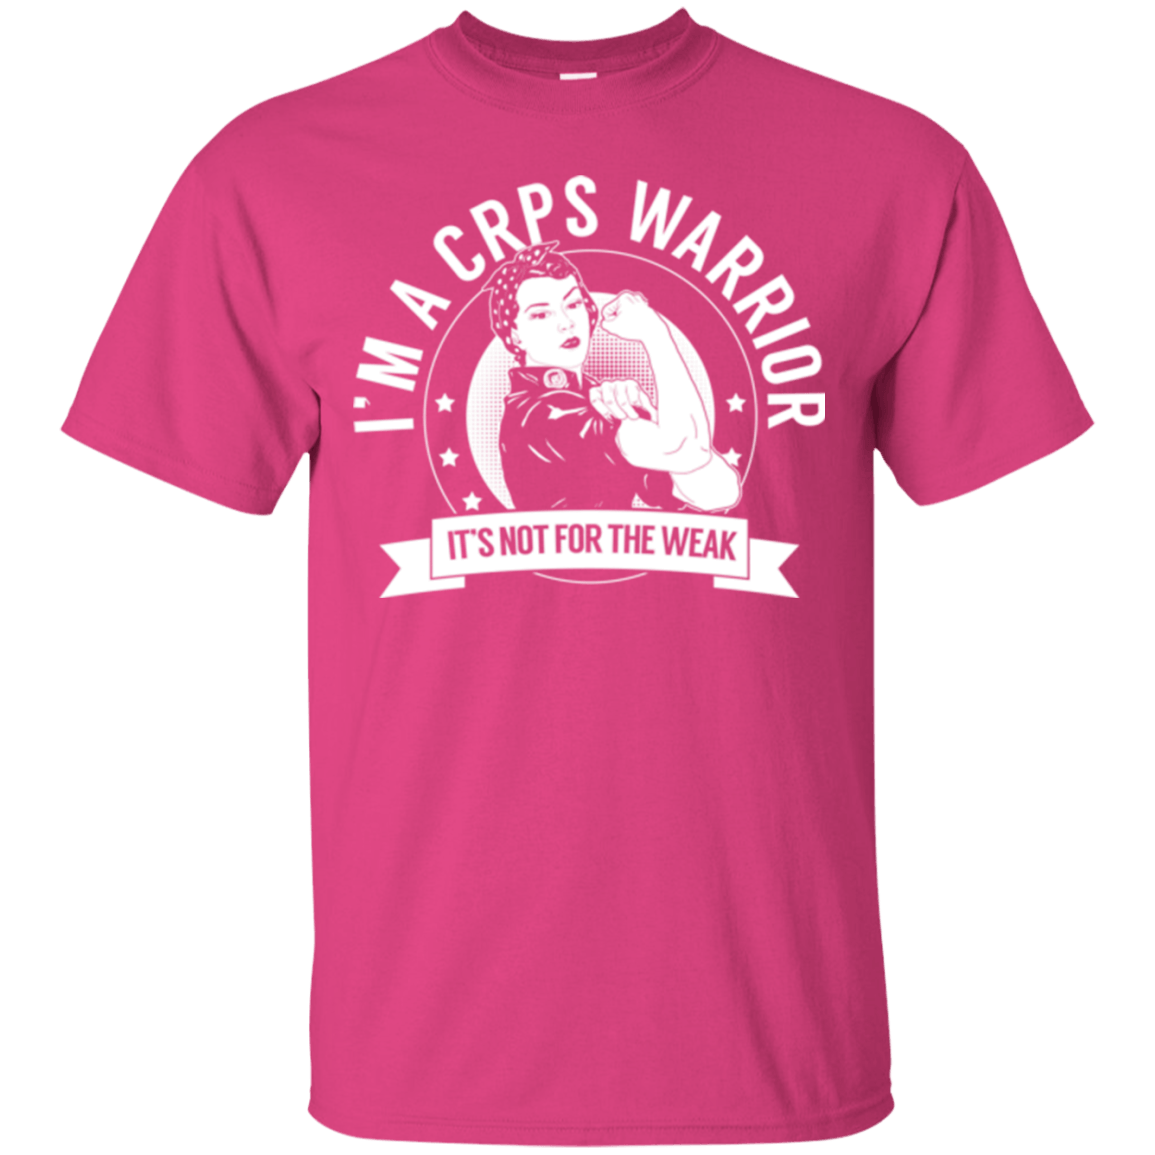 Complex Regional Pain Syndrome - CRPS Warrior Not For The Weak Unisex Shirt - The Unchargeables